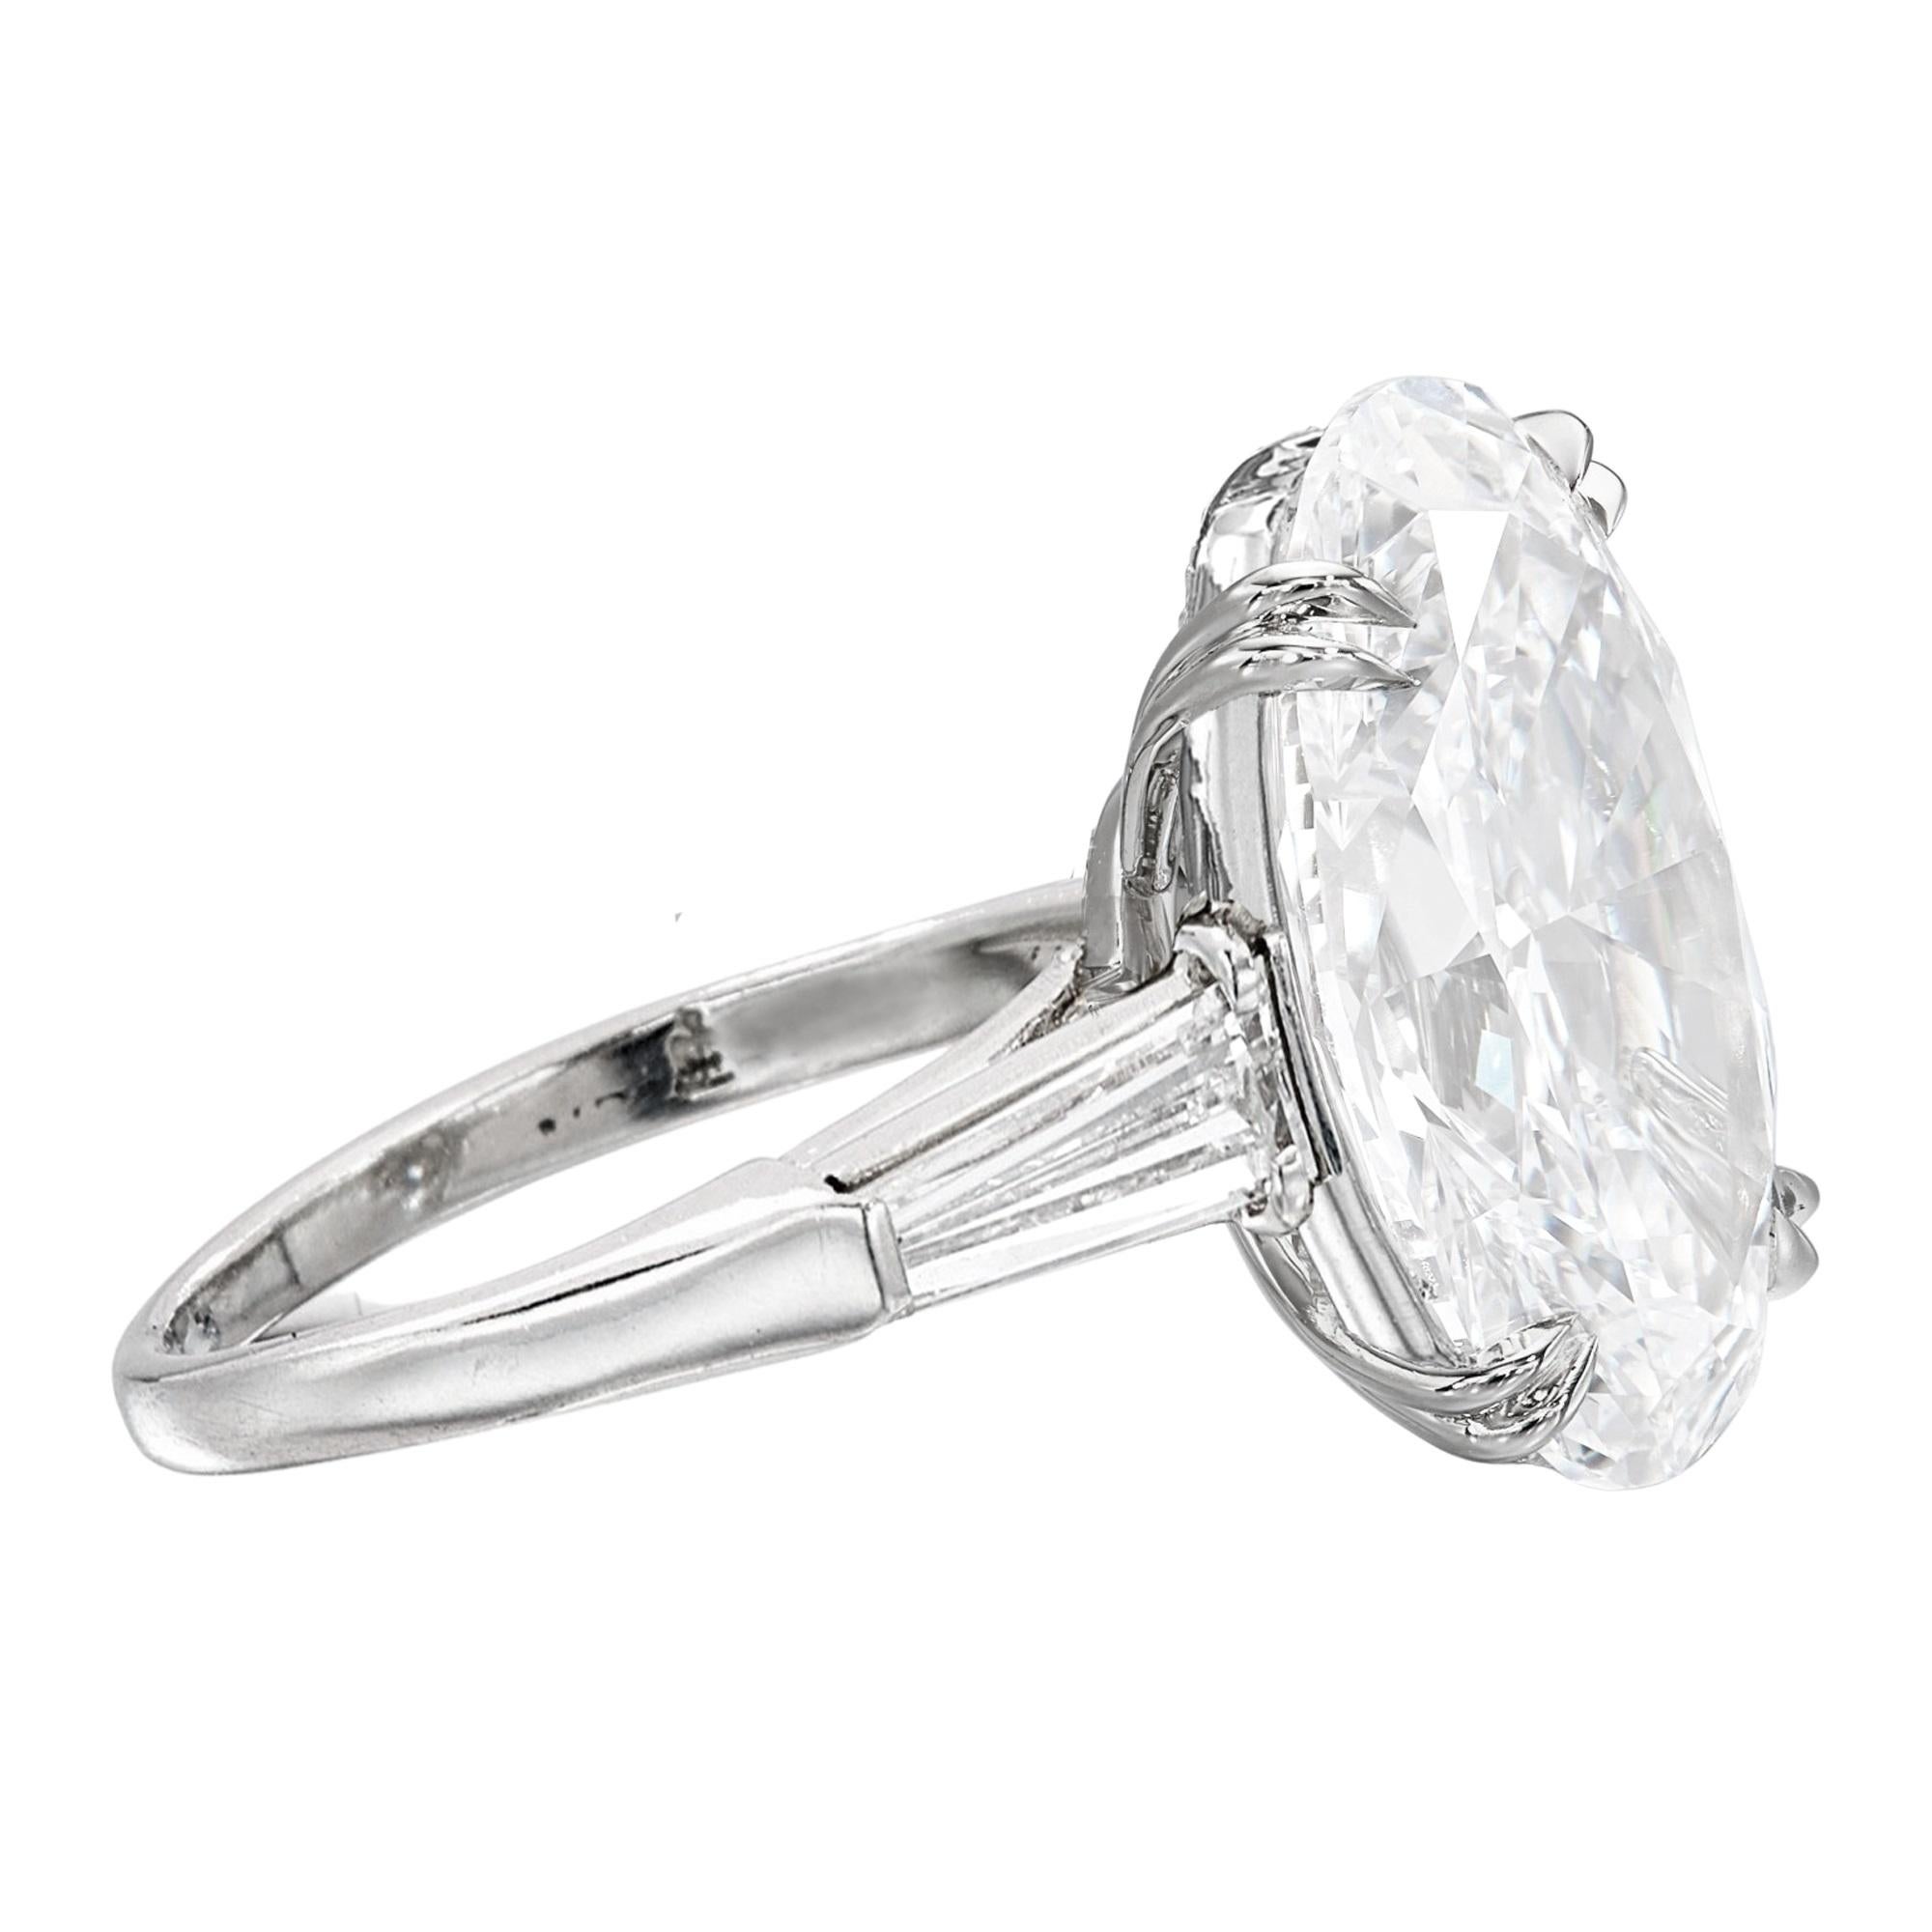 GIA Certified 3 Carat E Color VVS1 Clarity Oval Cut Diamond Solid Platinum Ring

Amazing roud cut diamond ring; the stone is GIA certified, according to its gemmological report is graded E in color and VVS1 in clarity with faint fluorescence.
The